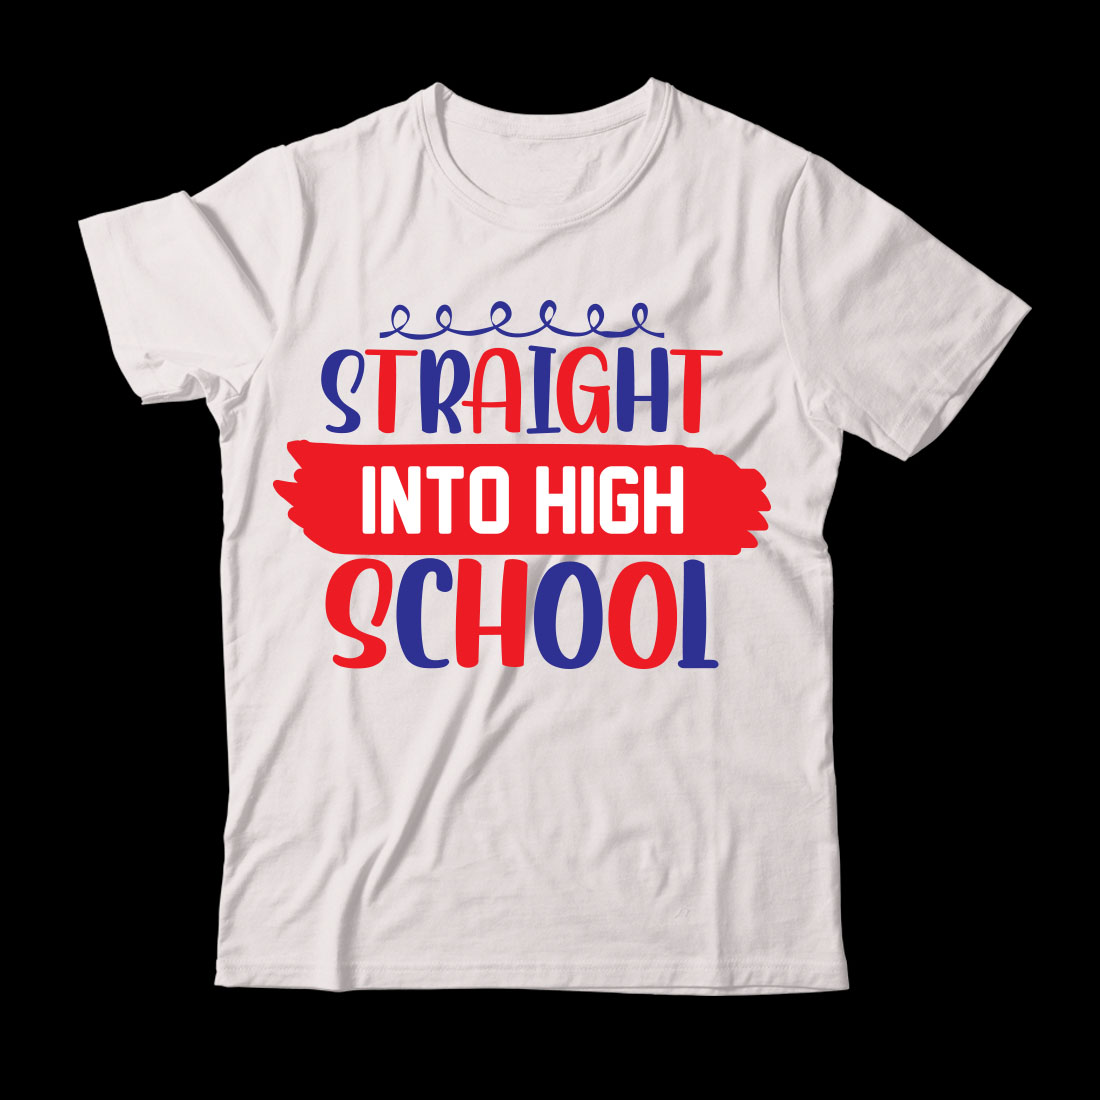 White t - shirt that says straight into high school.